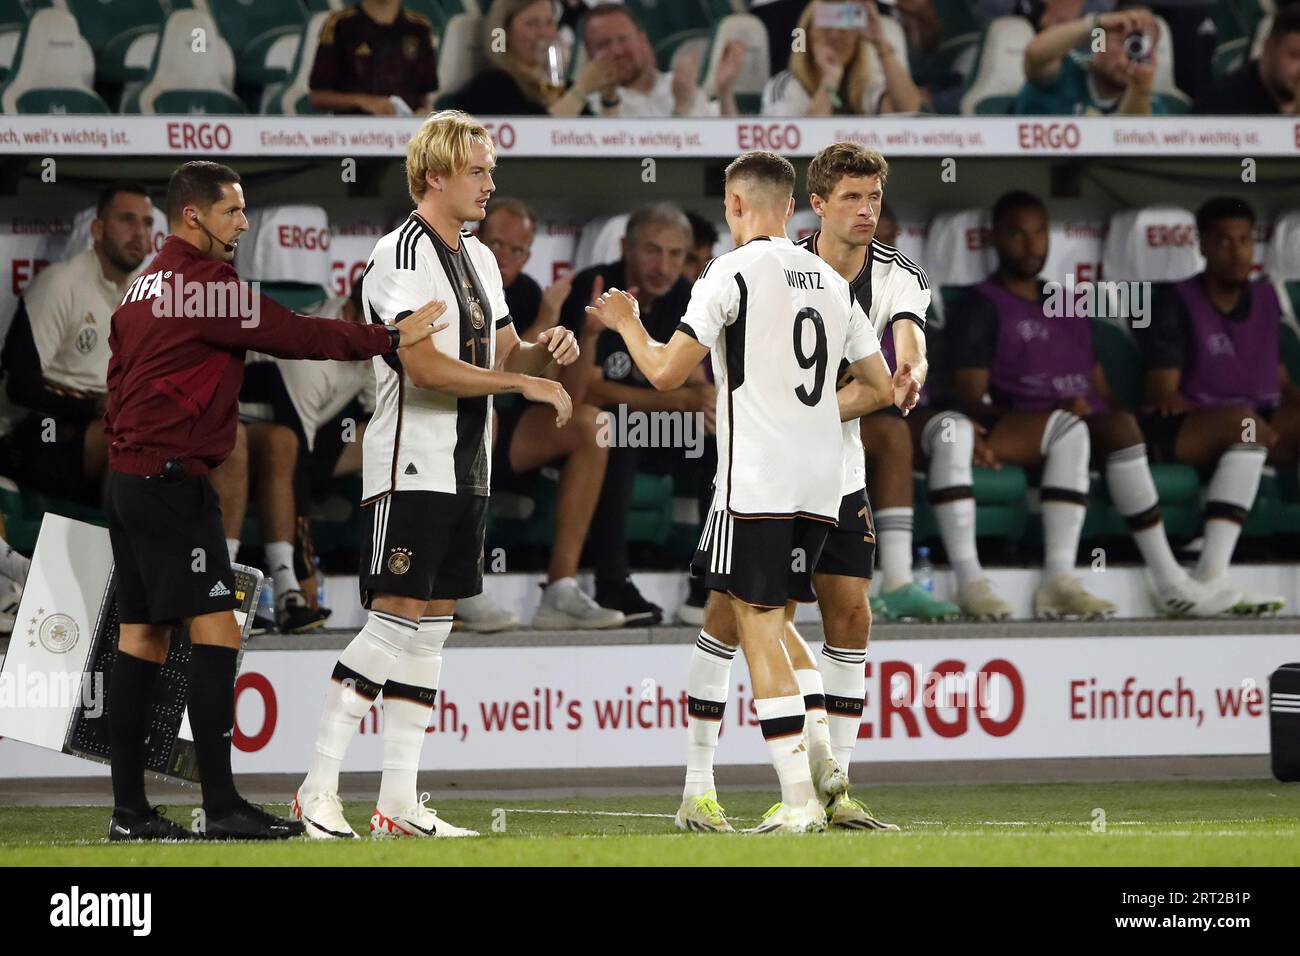 WOLFSBURG - (l-r) Julian Brandt of Germany, Florian Wirtz of Germany, Thomas Muller of Germany during the friendly Interland match between Germany and Japan at the Volkswagen Arena on September 9, 2023 in Wolfsburg, Germany. ANP | Hollandse Hoogte | BART STOUTJESDIJK Stock Photo